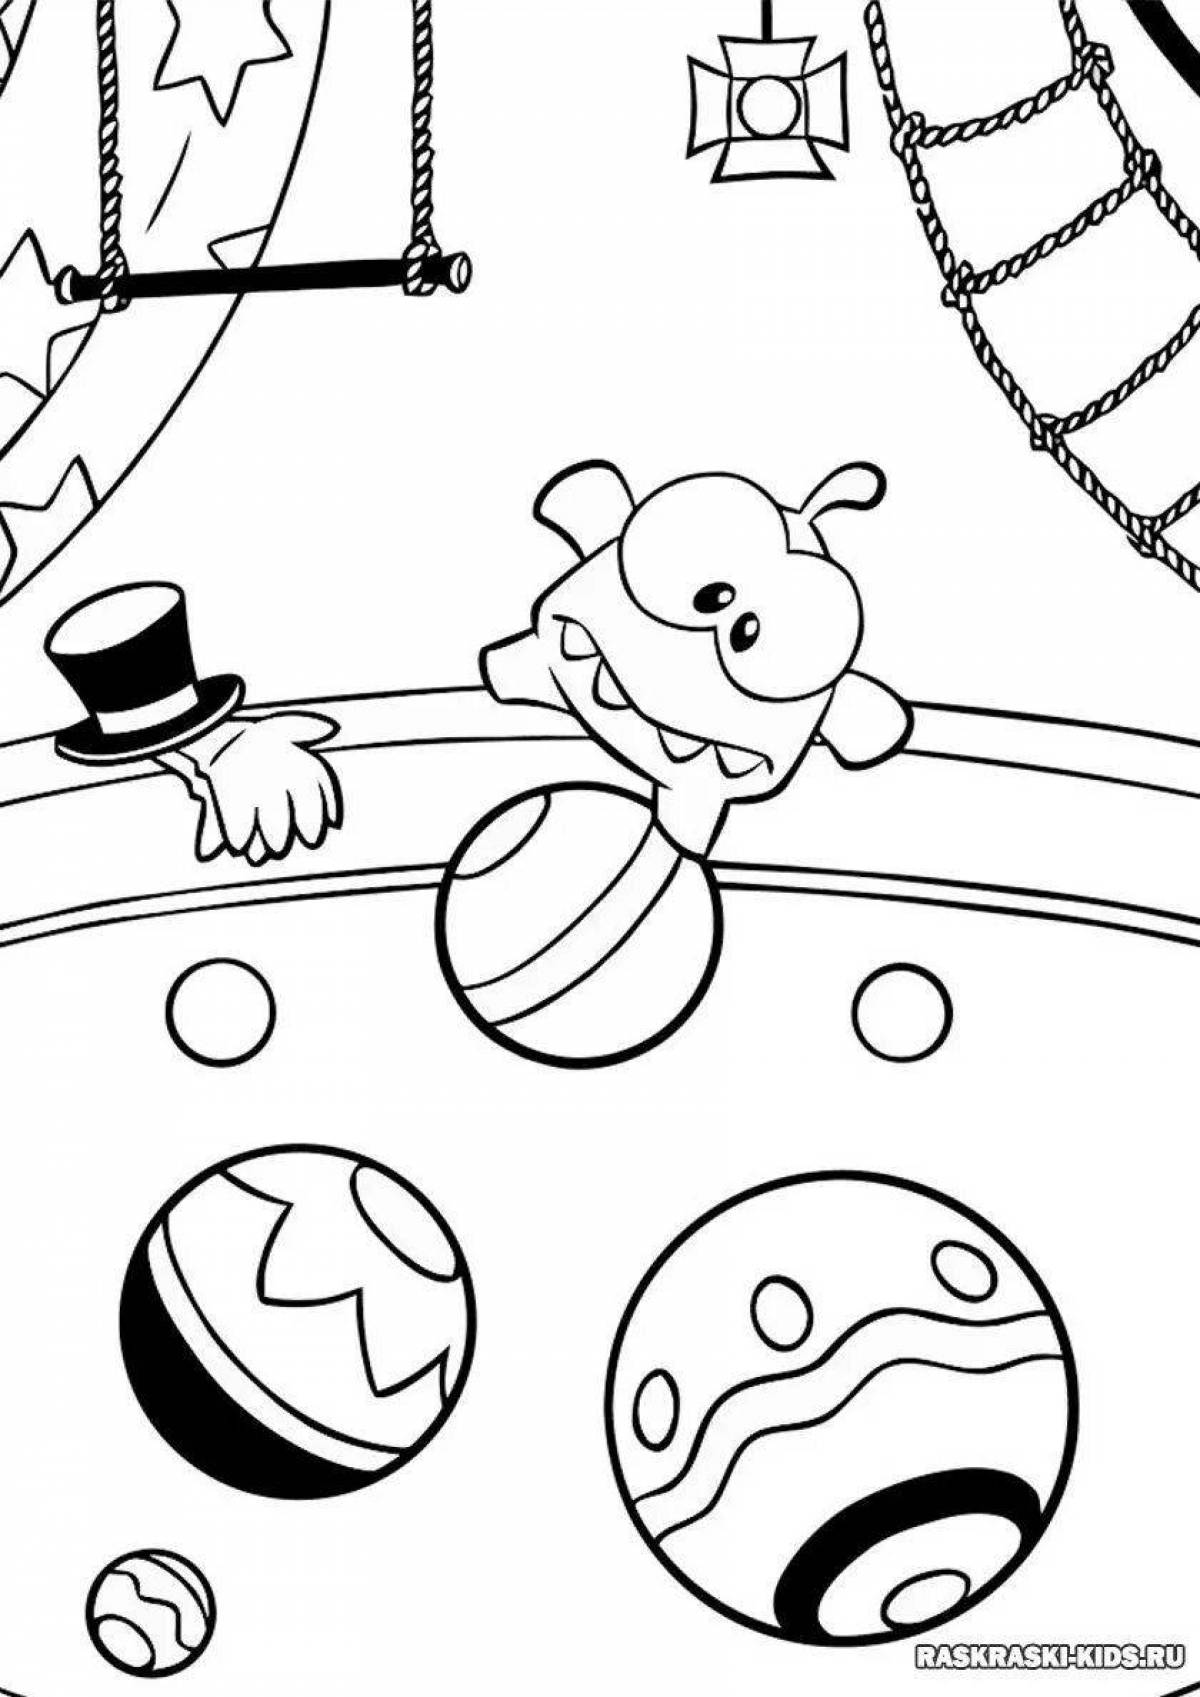 Playful yum yum coloring page